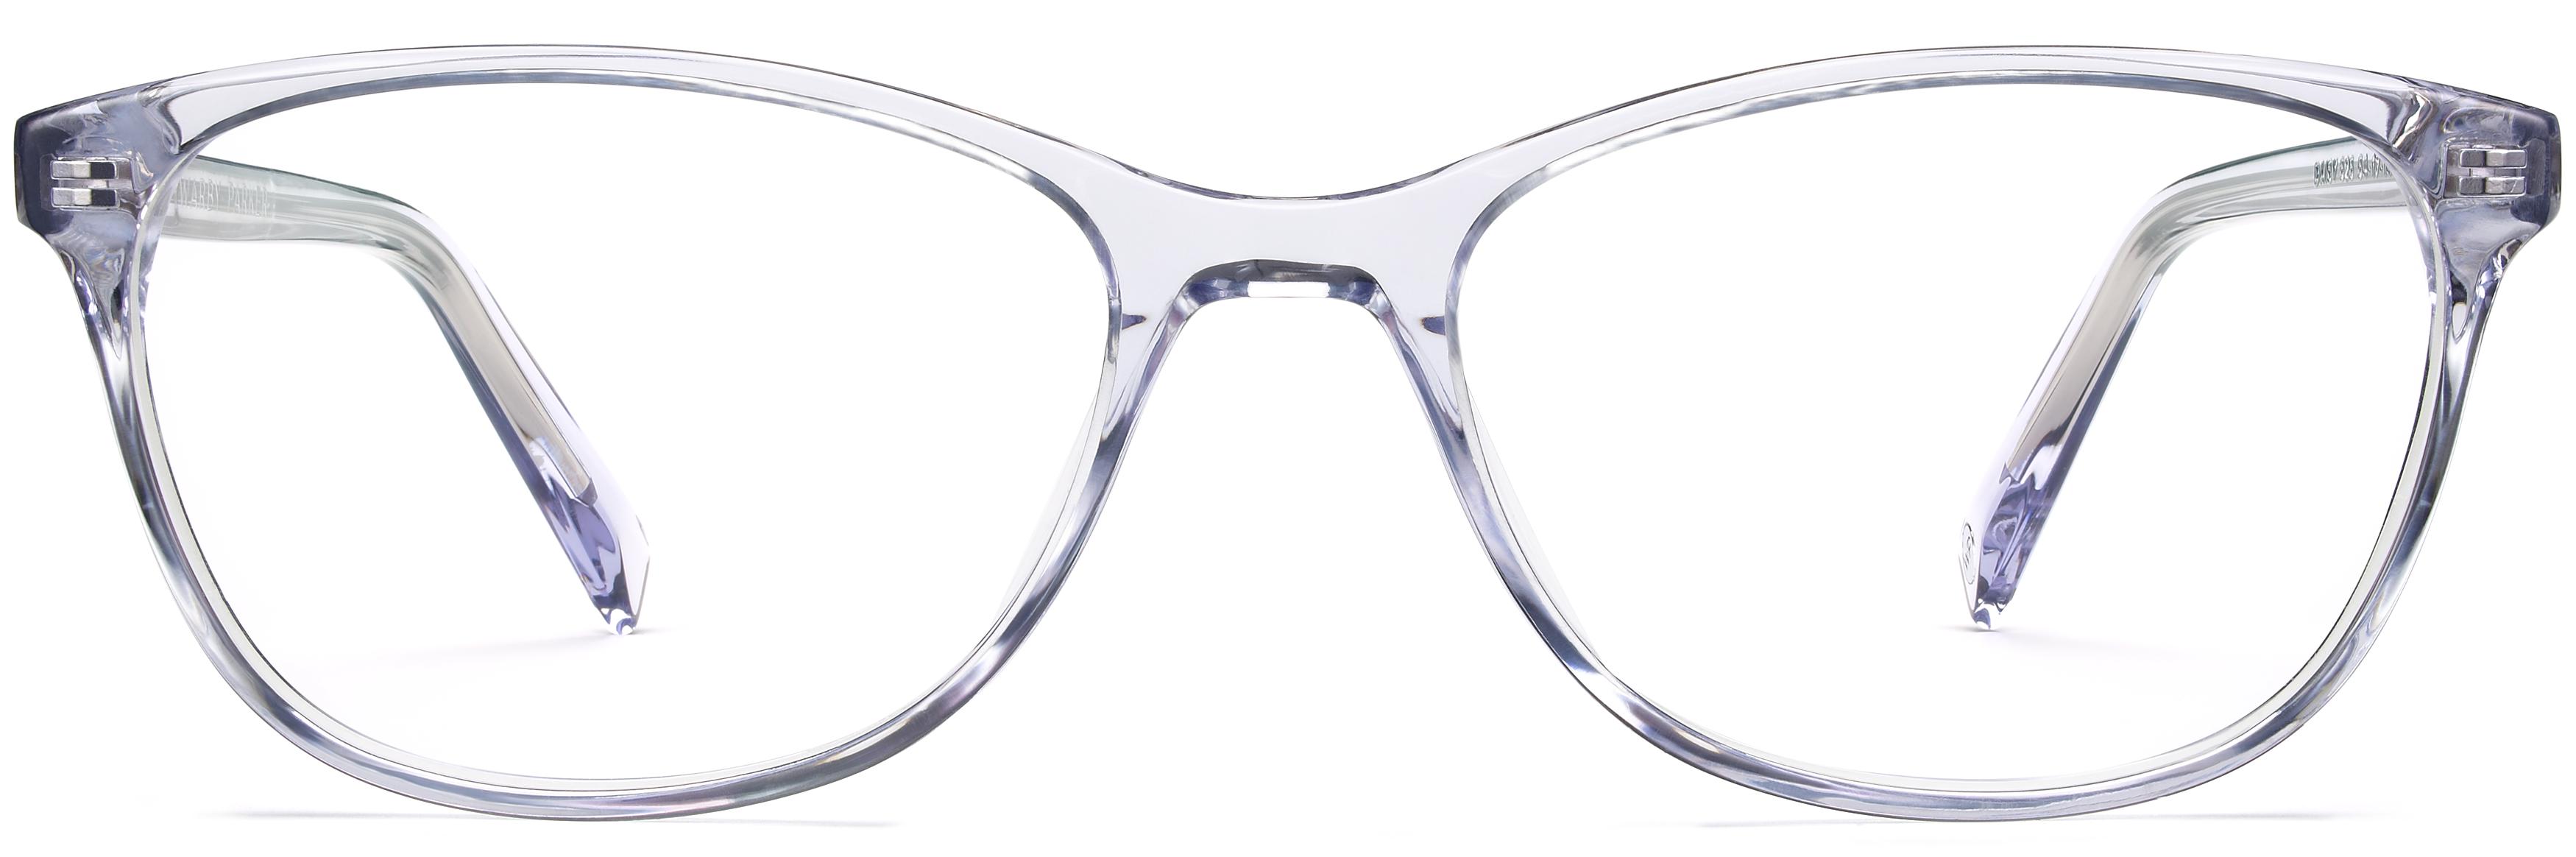 Daisy Eyeglasses In Lavender Crystal Warby Parker